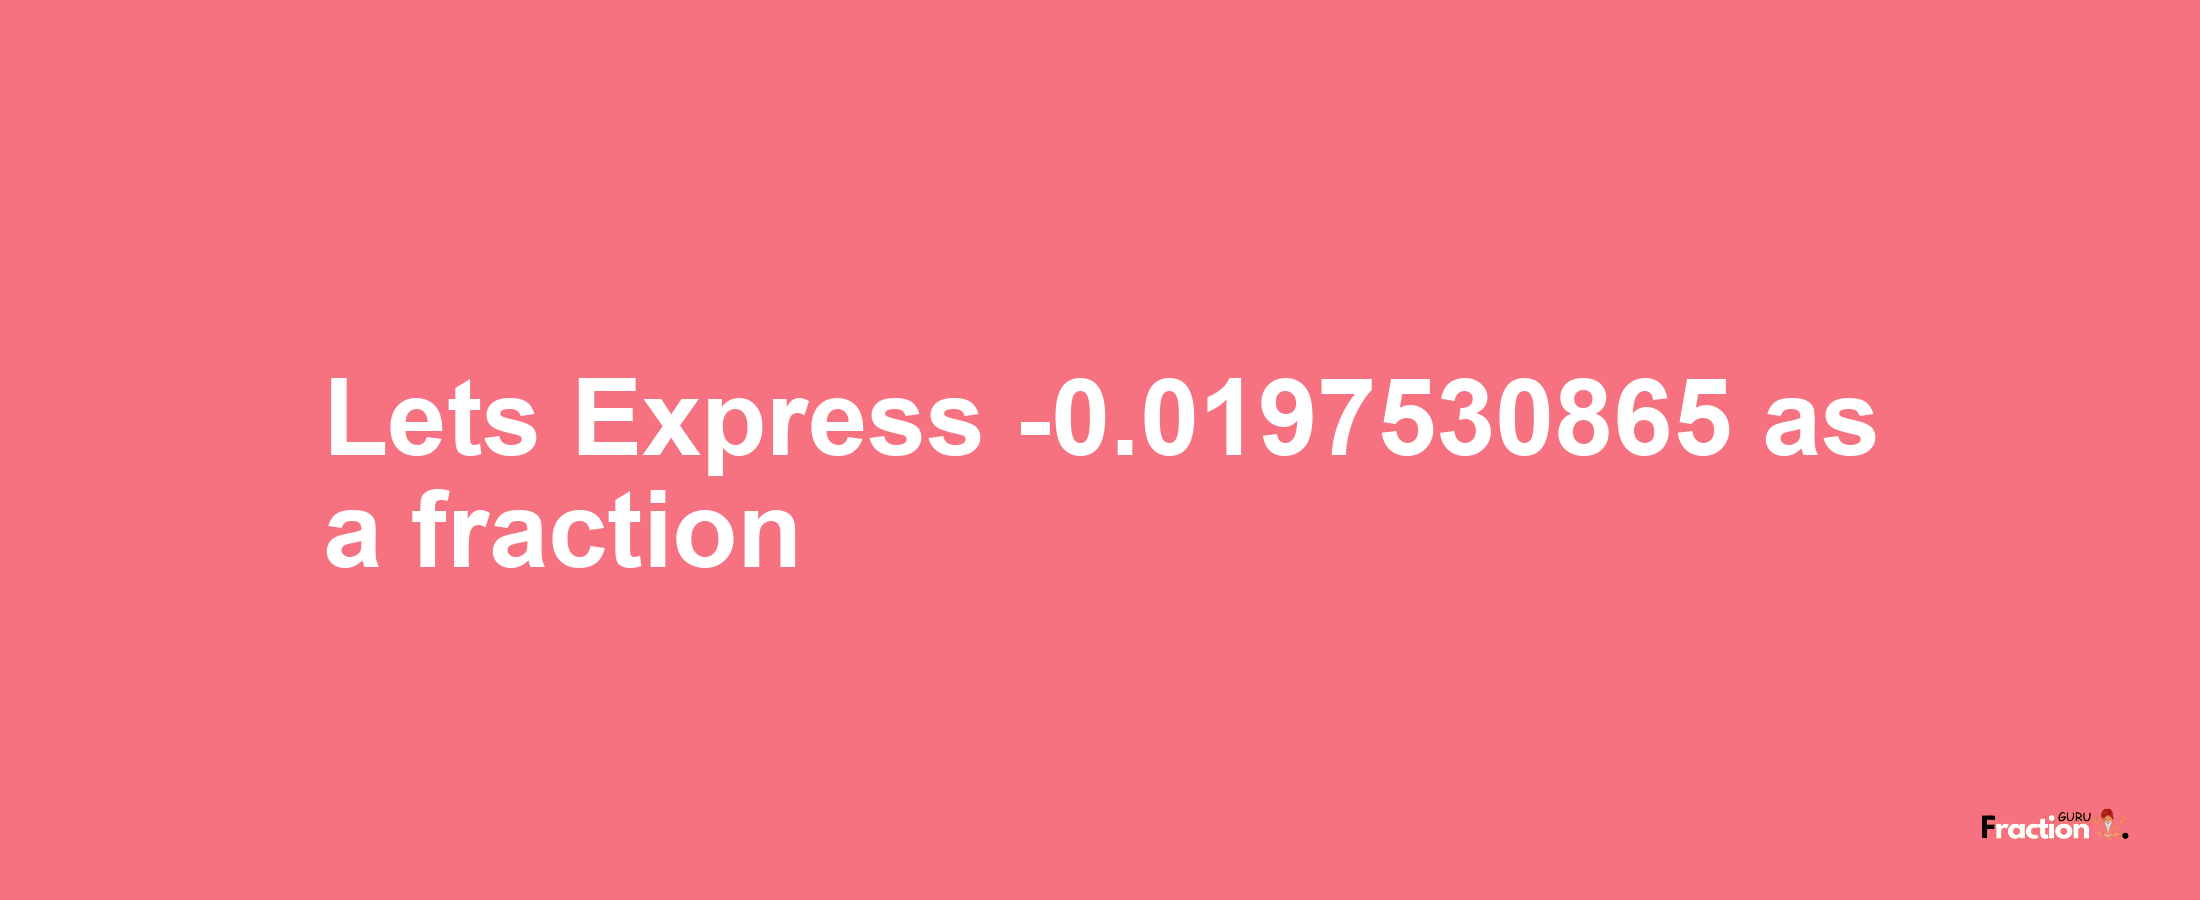 Lets Express -0.0197530865 as afraction